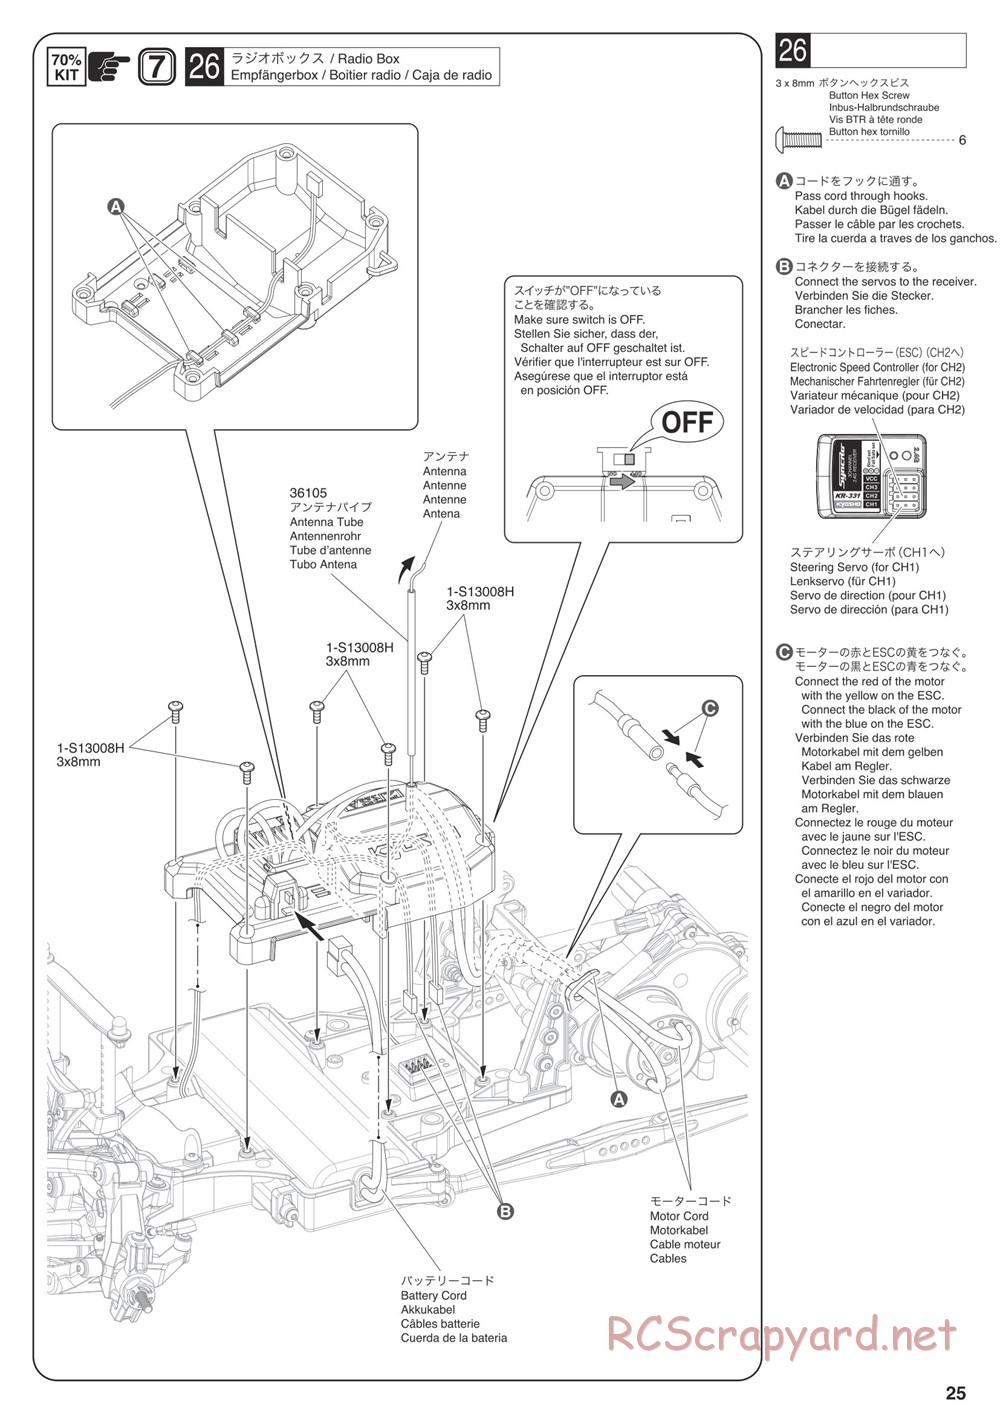 Kyosho - Outlaw Rampage Pro - Manual - Page 25